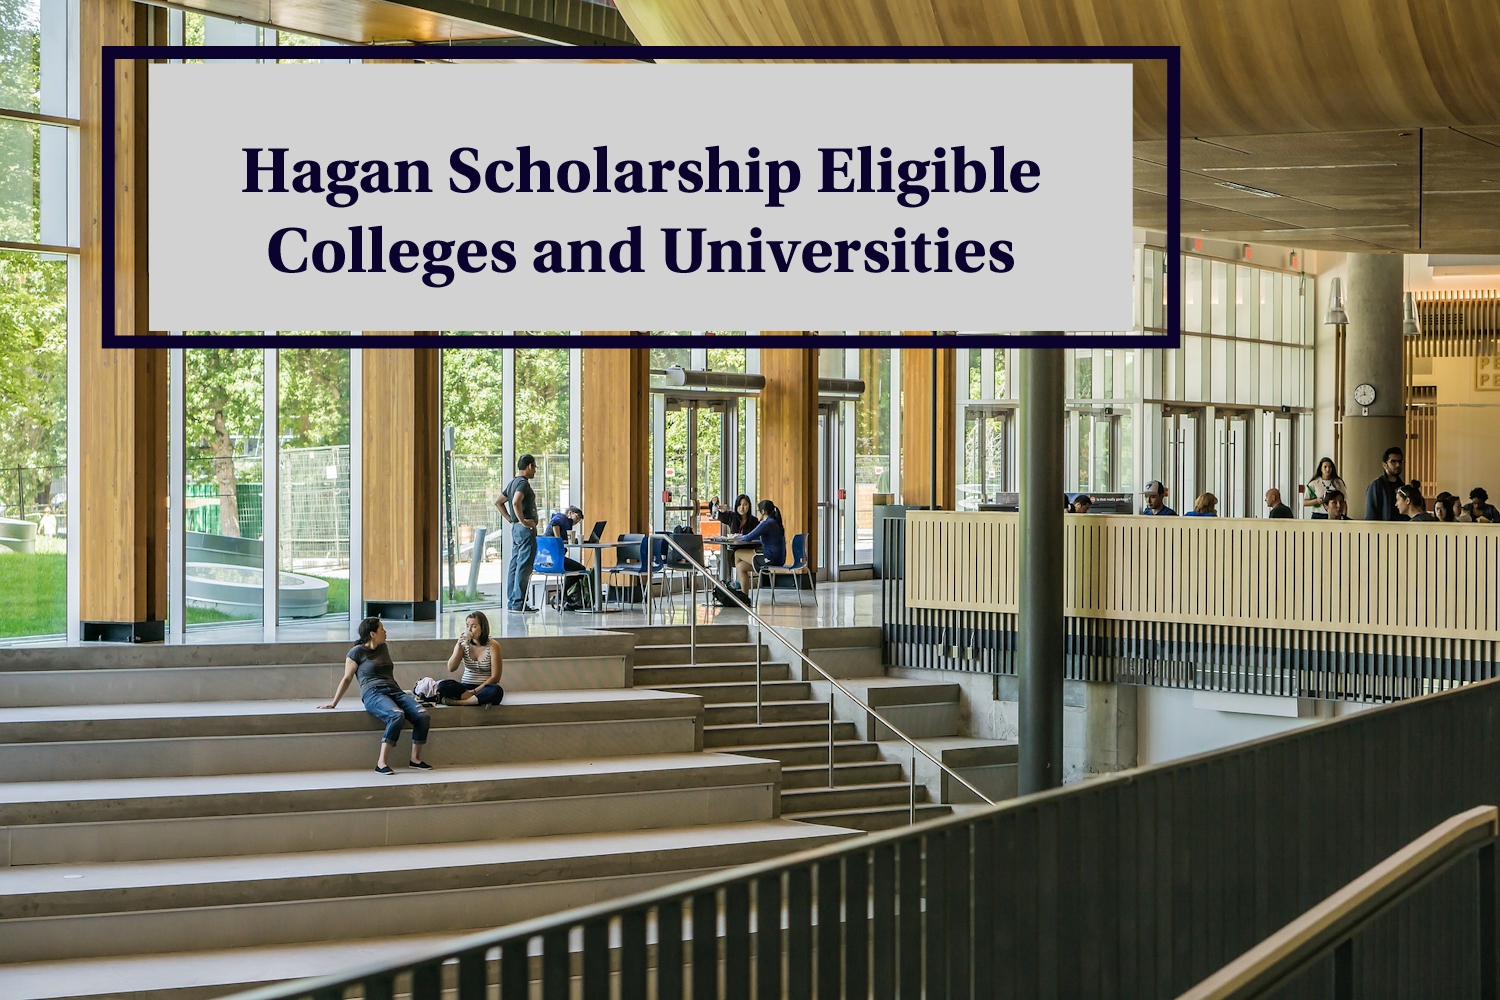 Hagan Scholarship Foundation Eligible Colleges and Universities